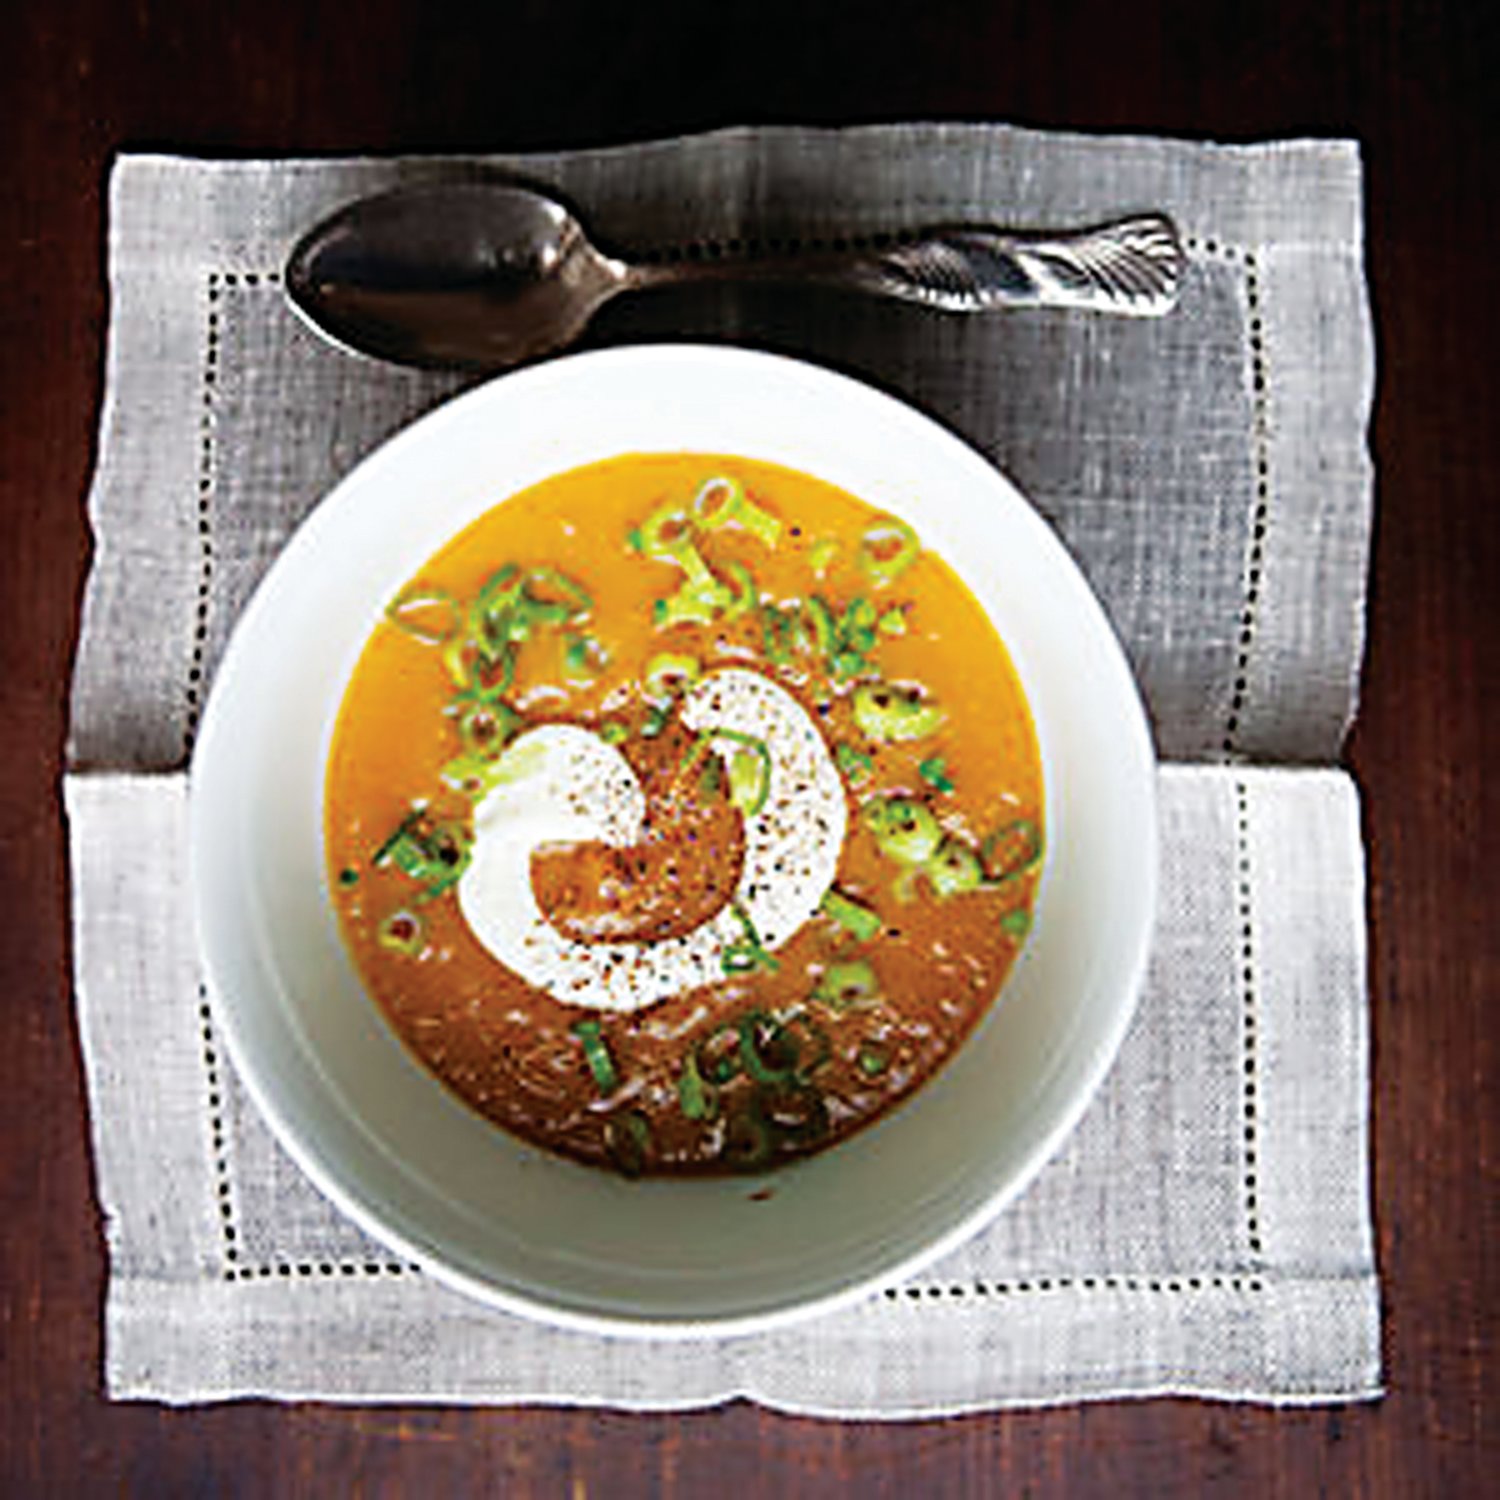 Carrot soup is from the soup chapter of the latest book by Canal House’s Christopher Hirsheimer and Melissa Hamilton.